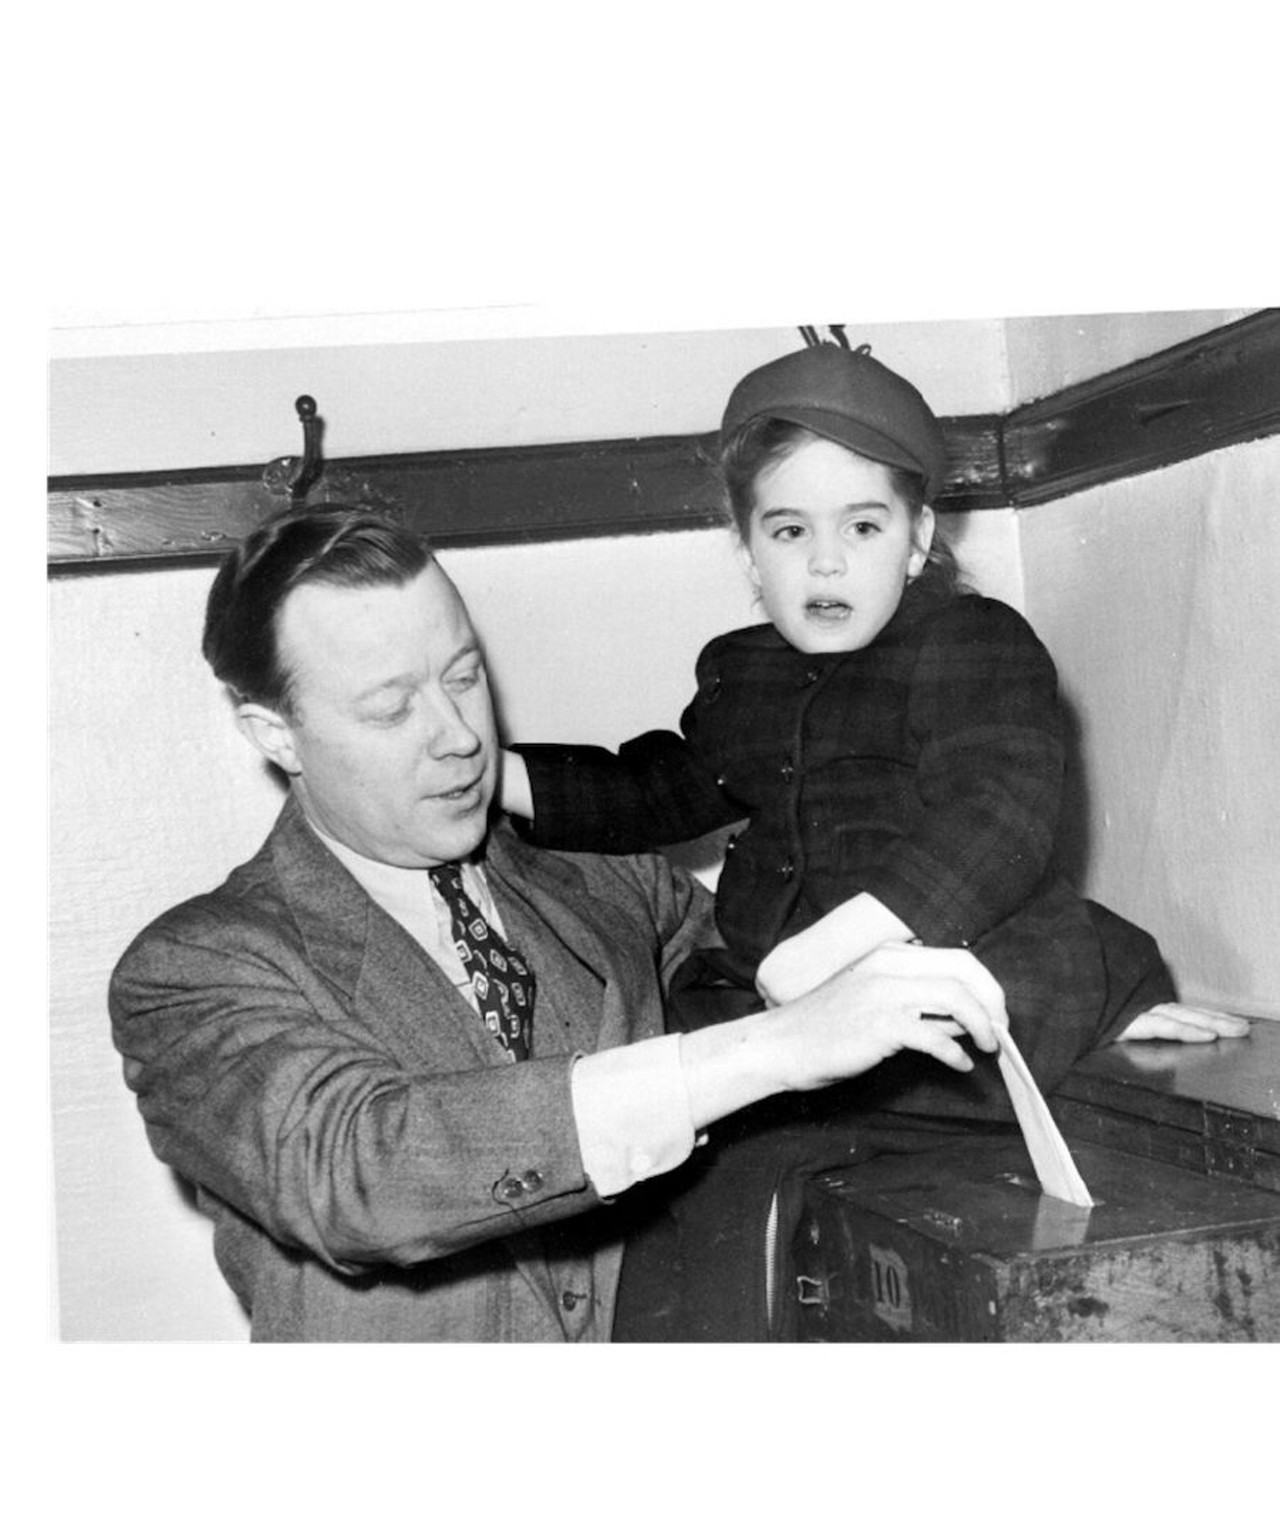 Labor leader Walter P. Reuther voting with daughter Linda. (1947)
All photos courtesy of Walter P. Reuther Library, Archives of Labor and Urban Affairs, Wayne State University